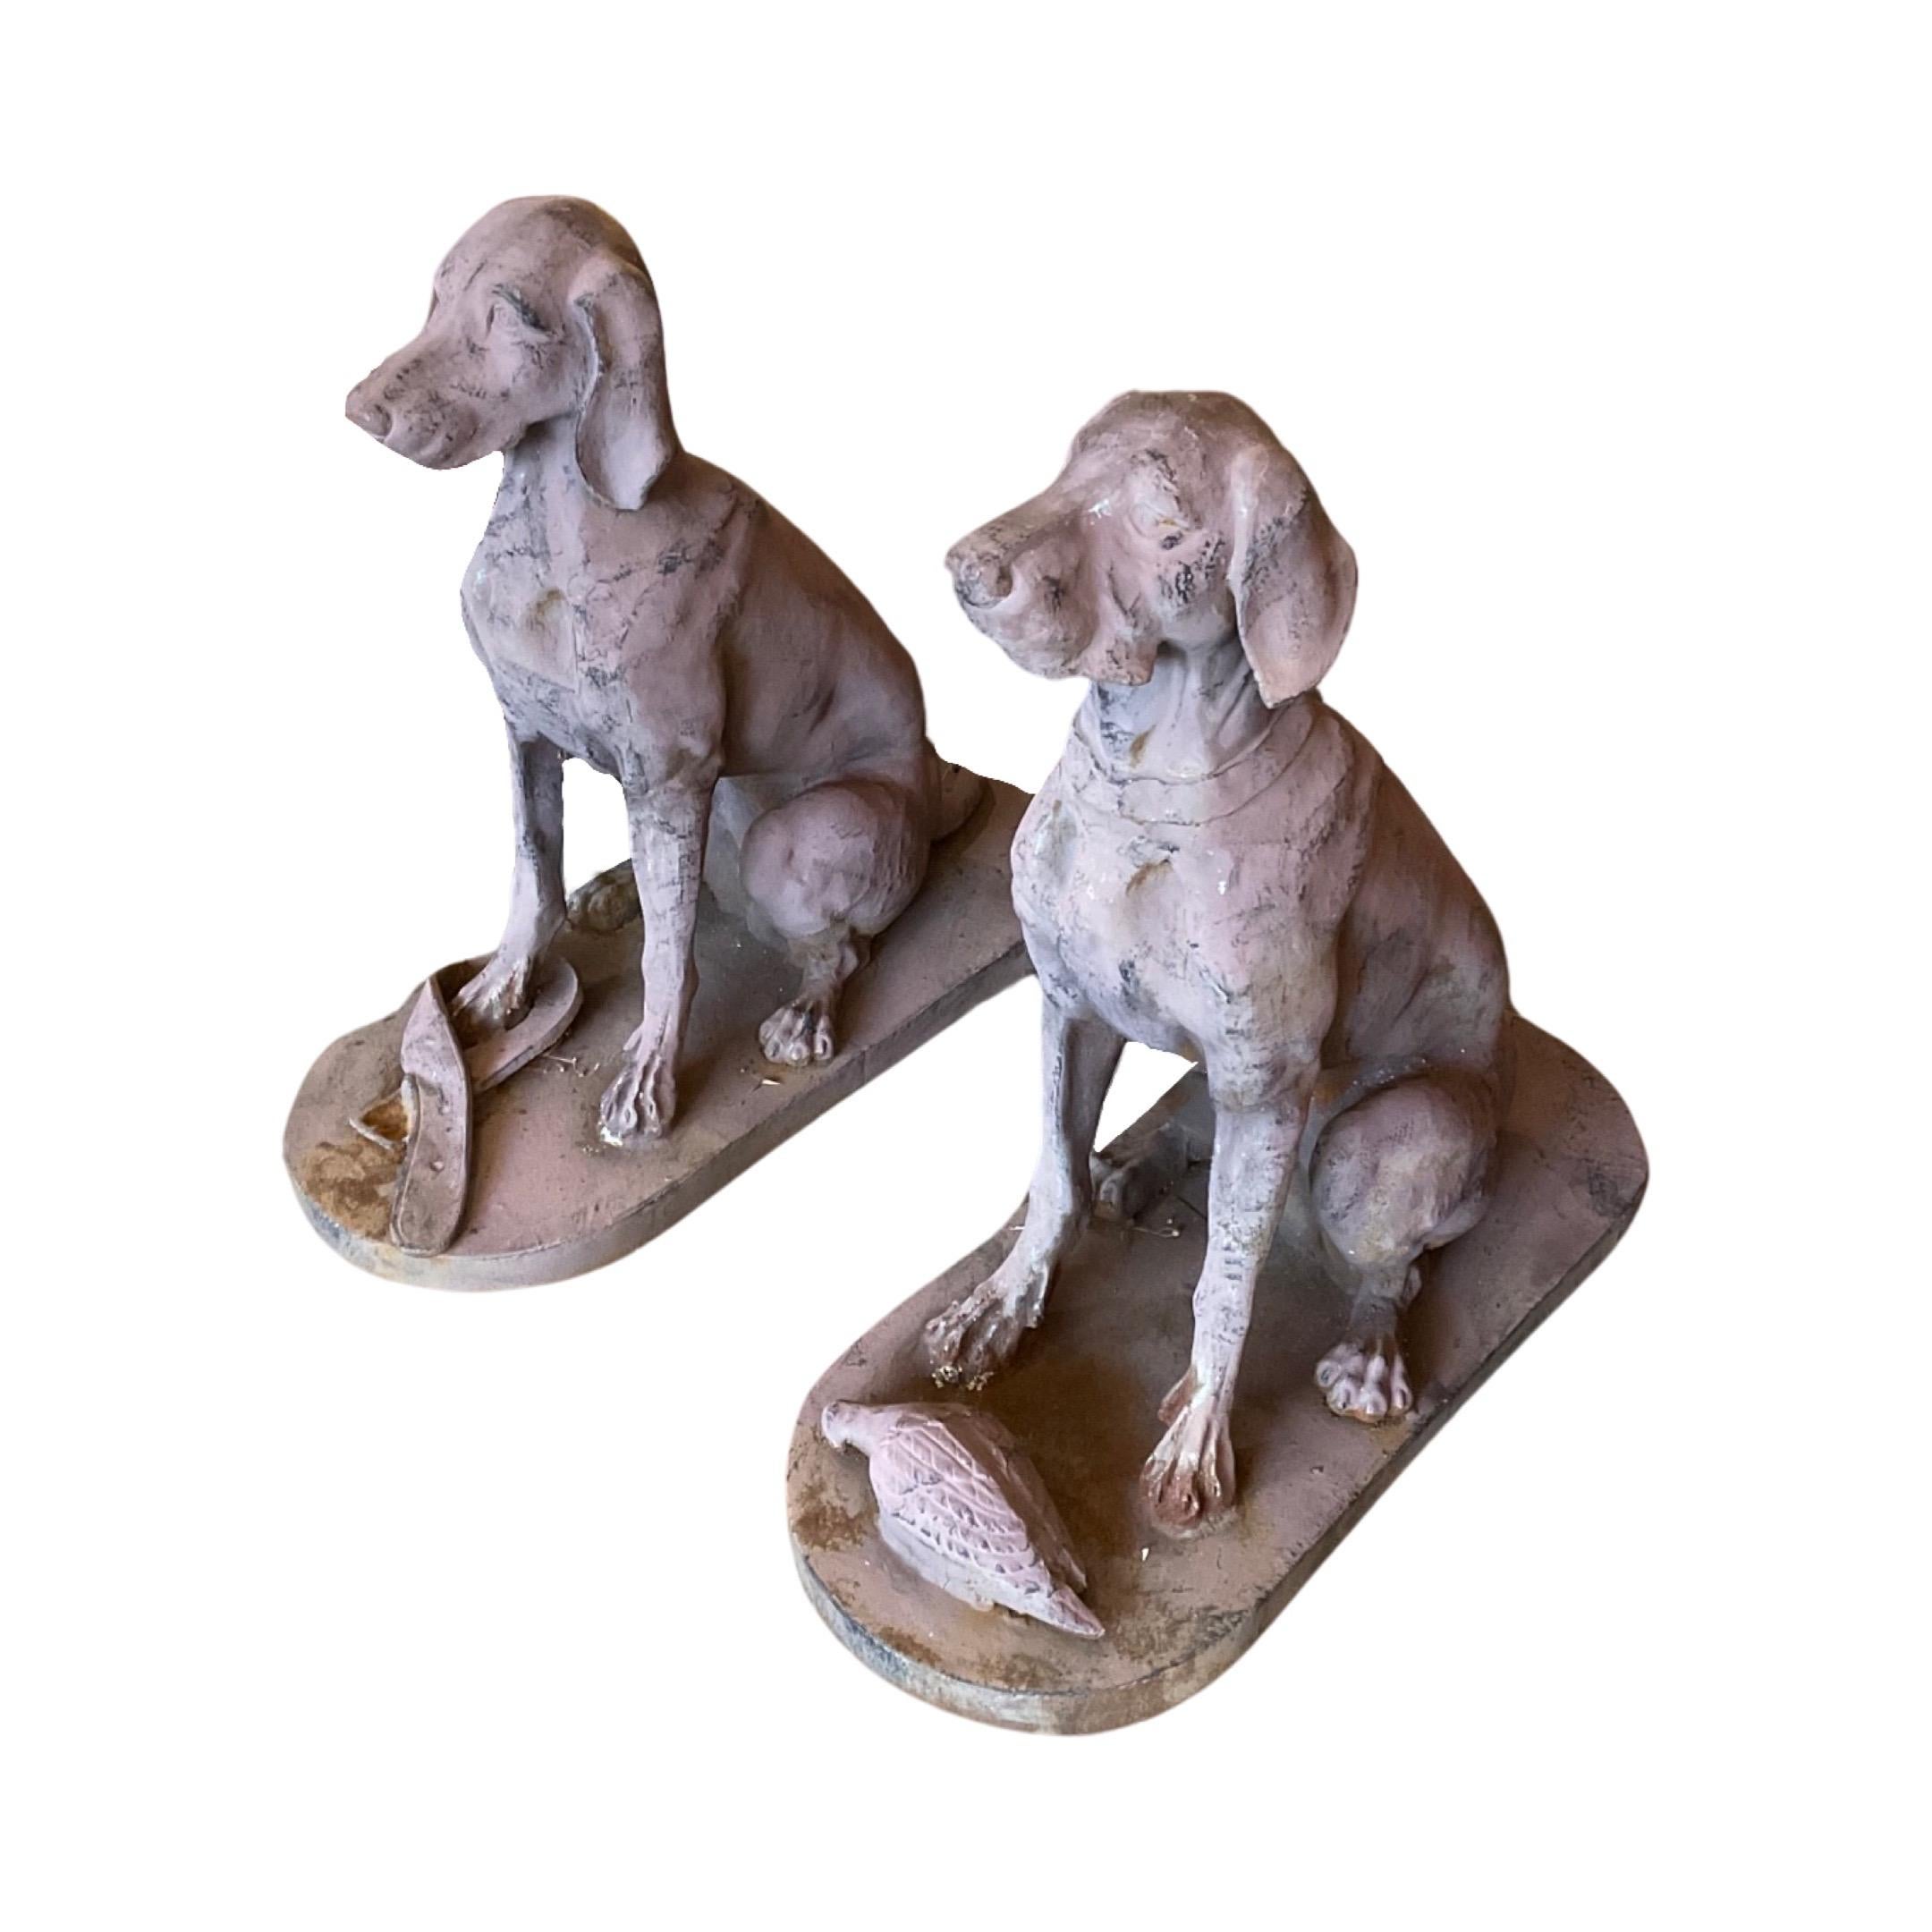 Elevate your home decor with this beautiful, vintage pair of French Iron Labrador Retriever Sculptures. Handcrafted from iron in the 1950s, these sculptures are a stylish and durable addition to your living space. A true piece of craftsmanship from